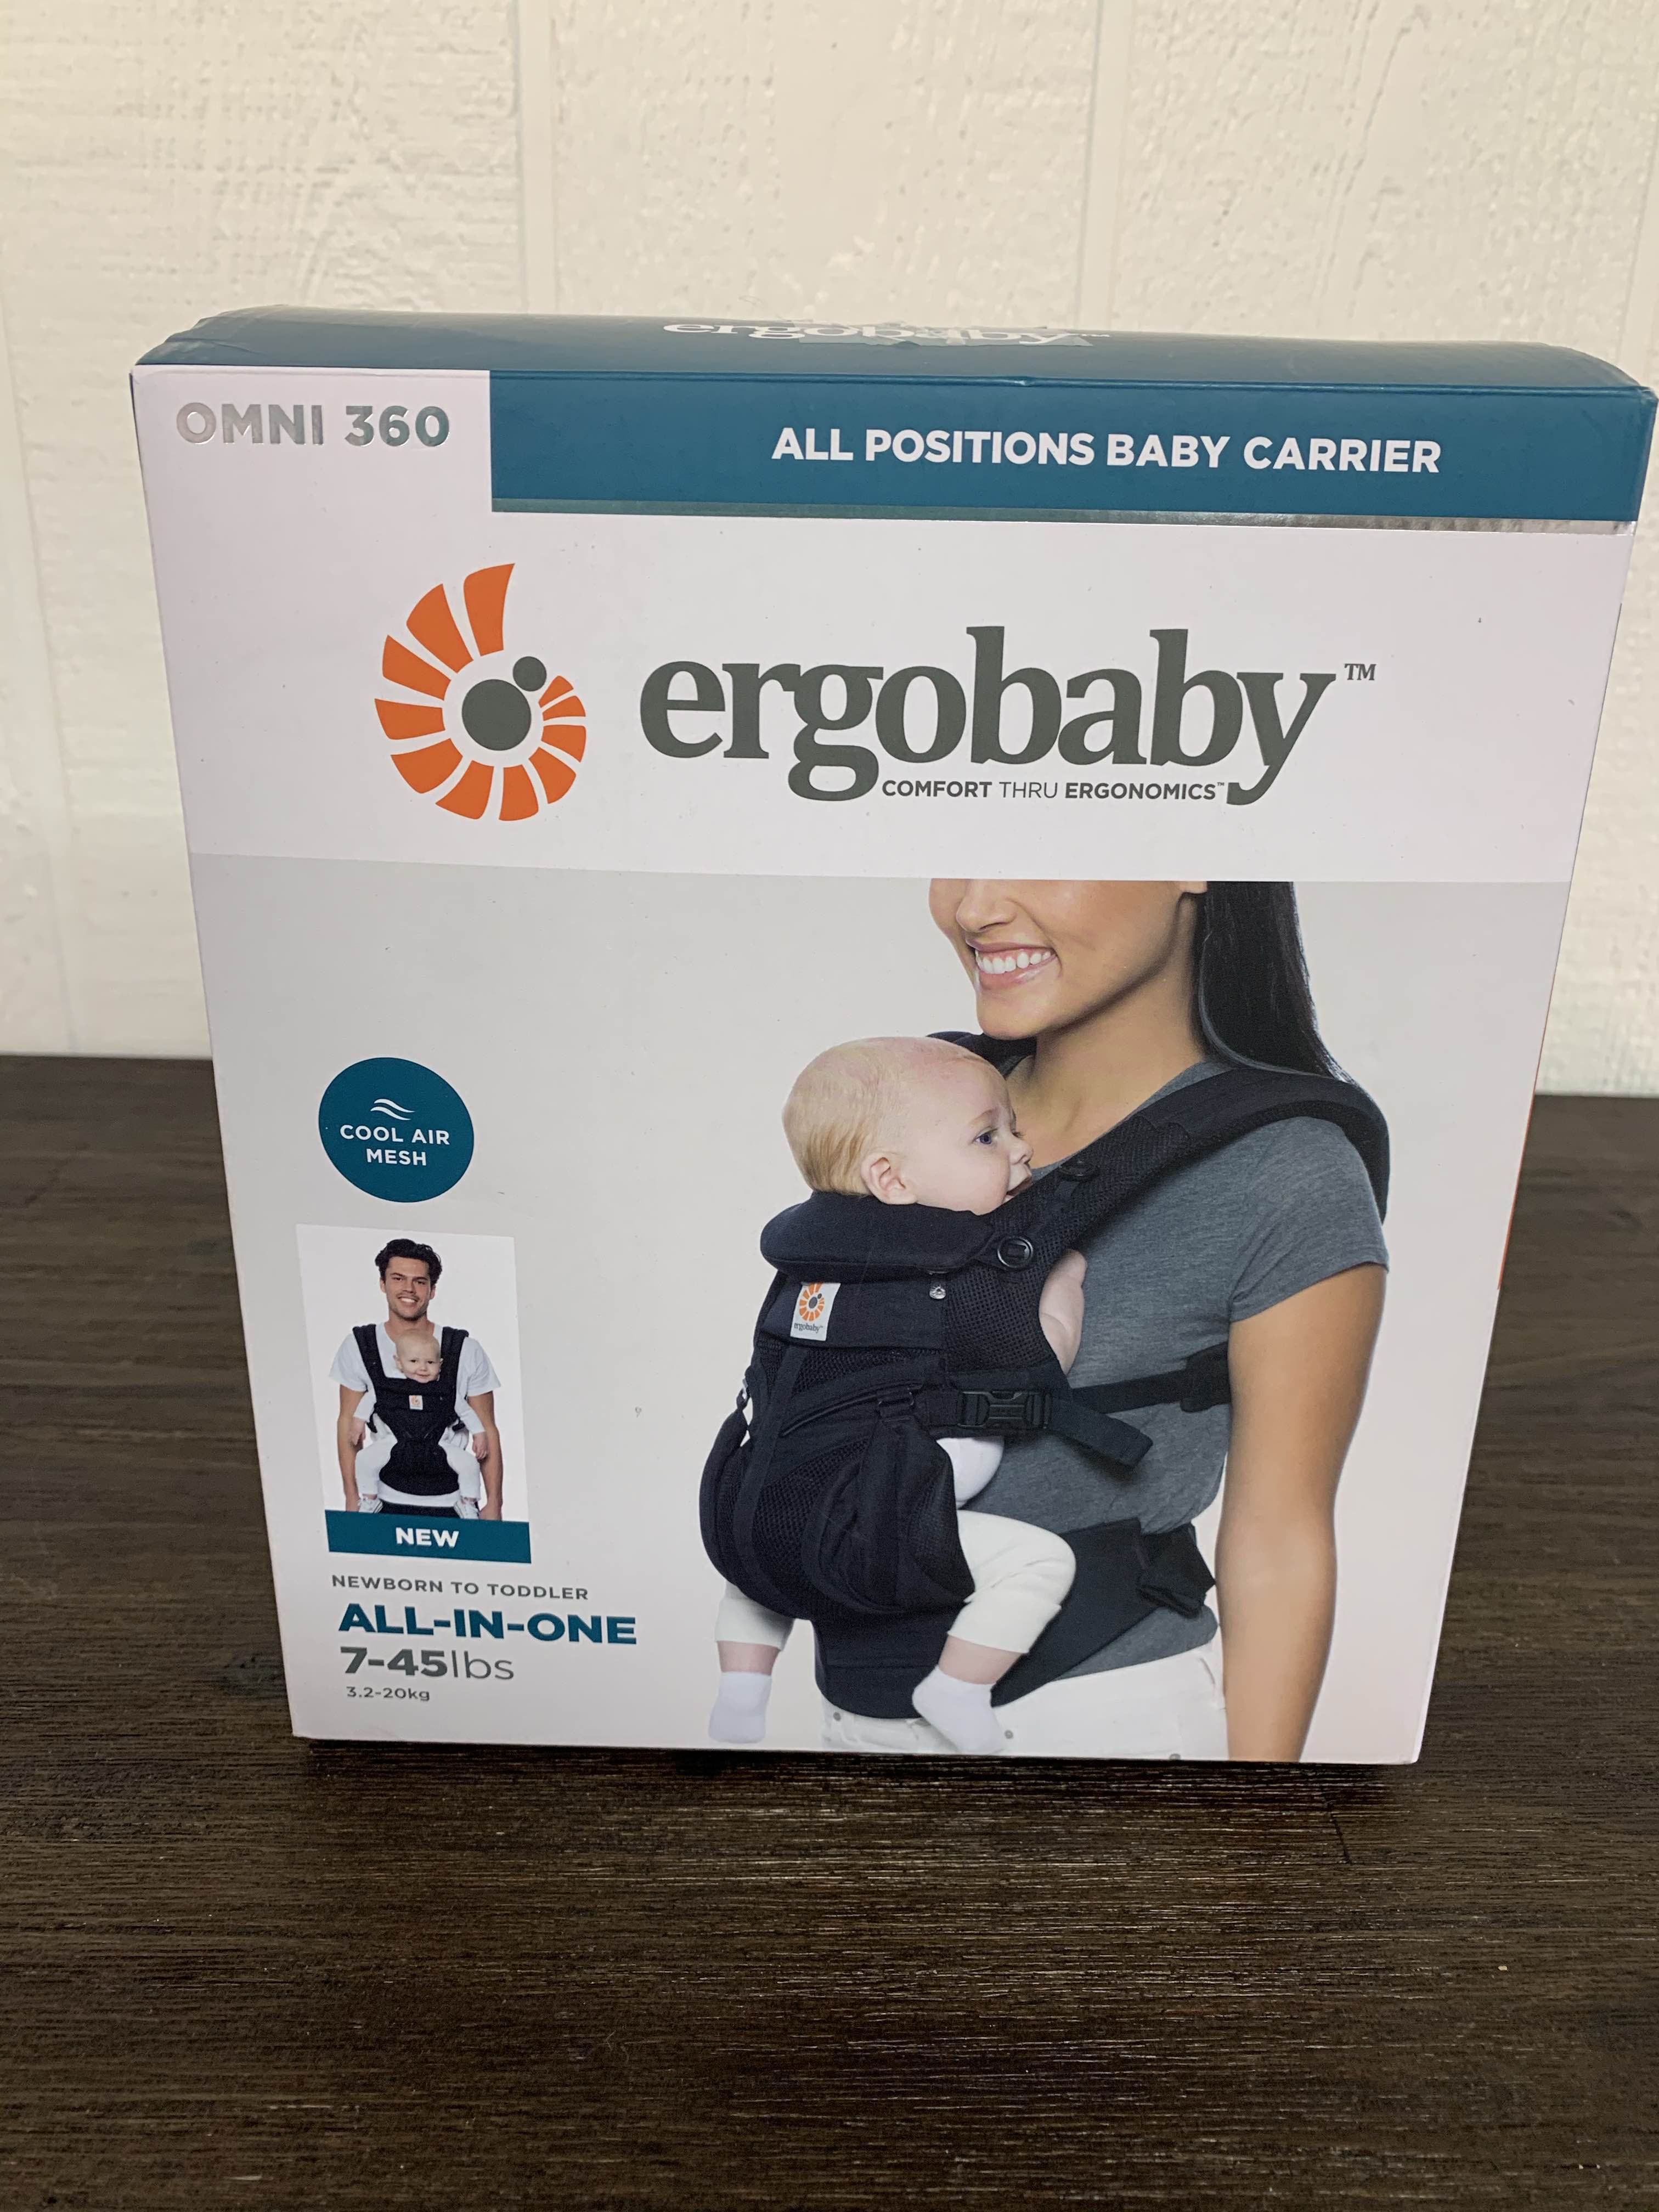 Ergobaby Omni 360 All-In-One Baby Carrier Newborn toToddler 7 to 45 lbs New